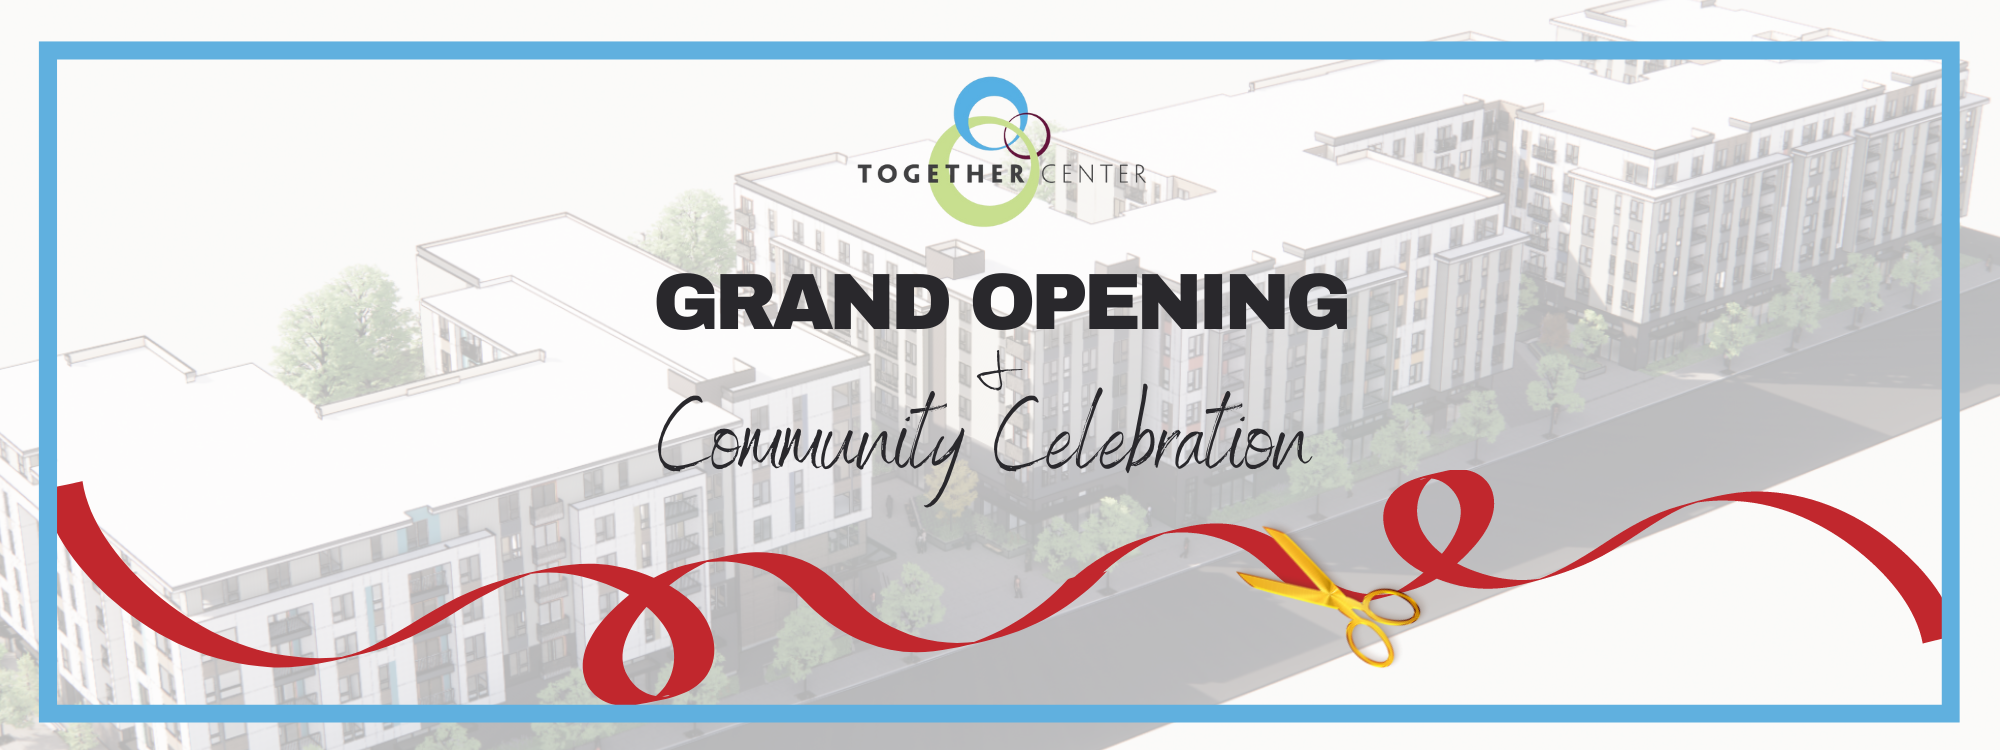 Header with picture of building rendering and red ribbon that says Grand Opening & Community Celebration